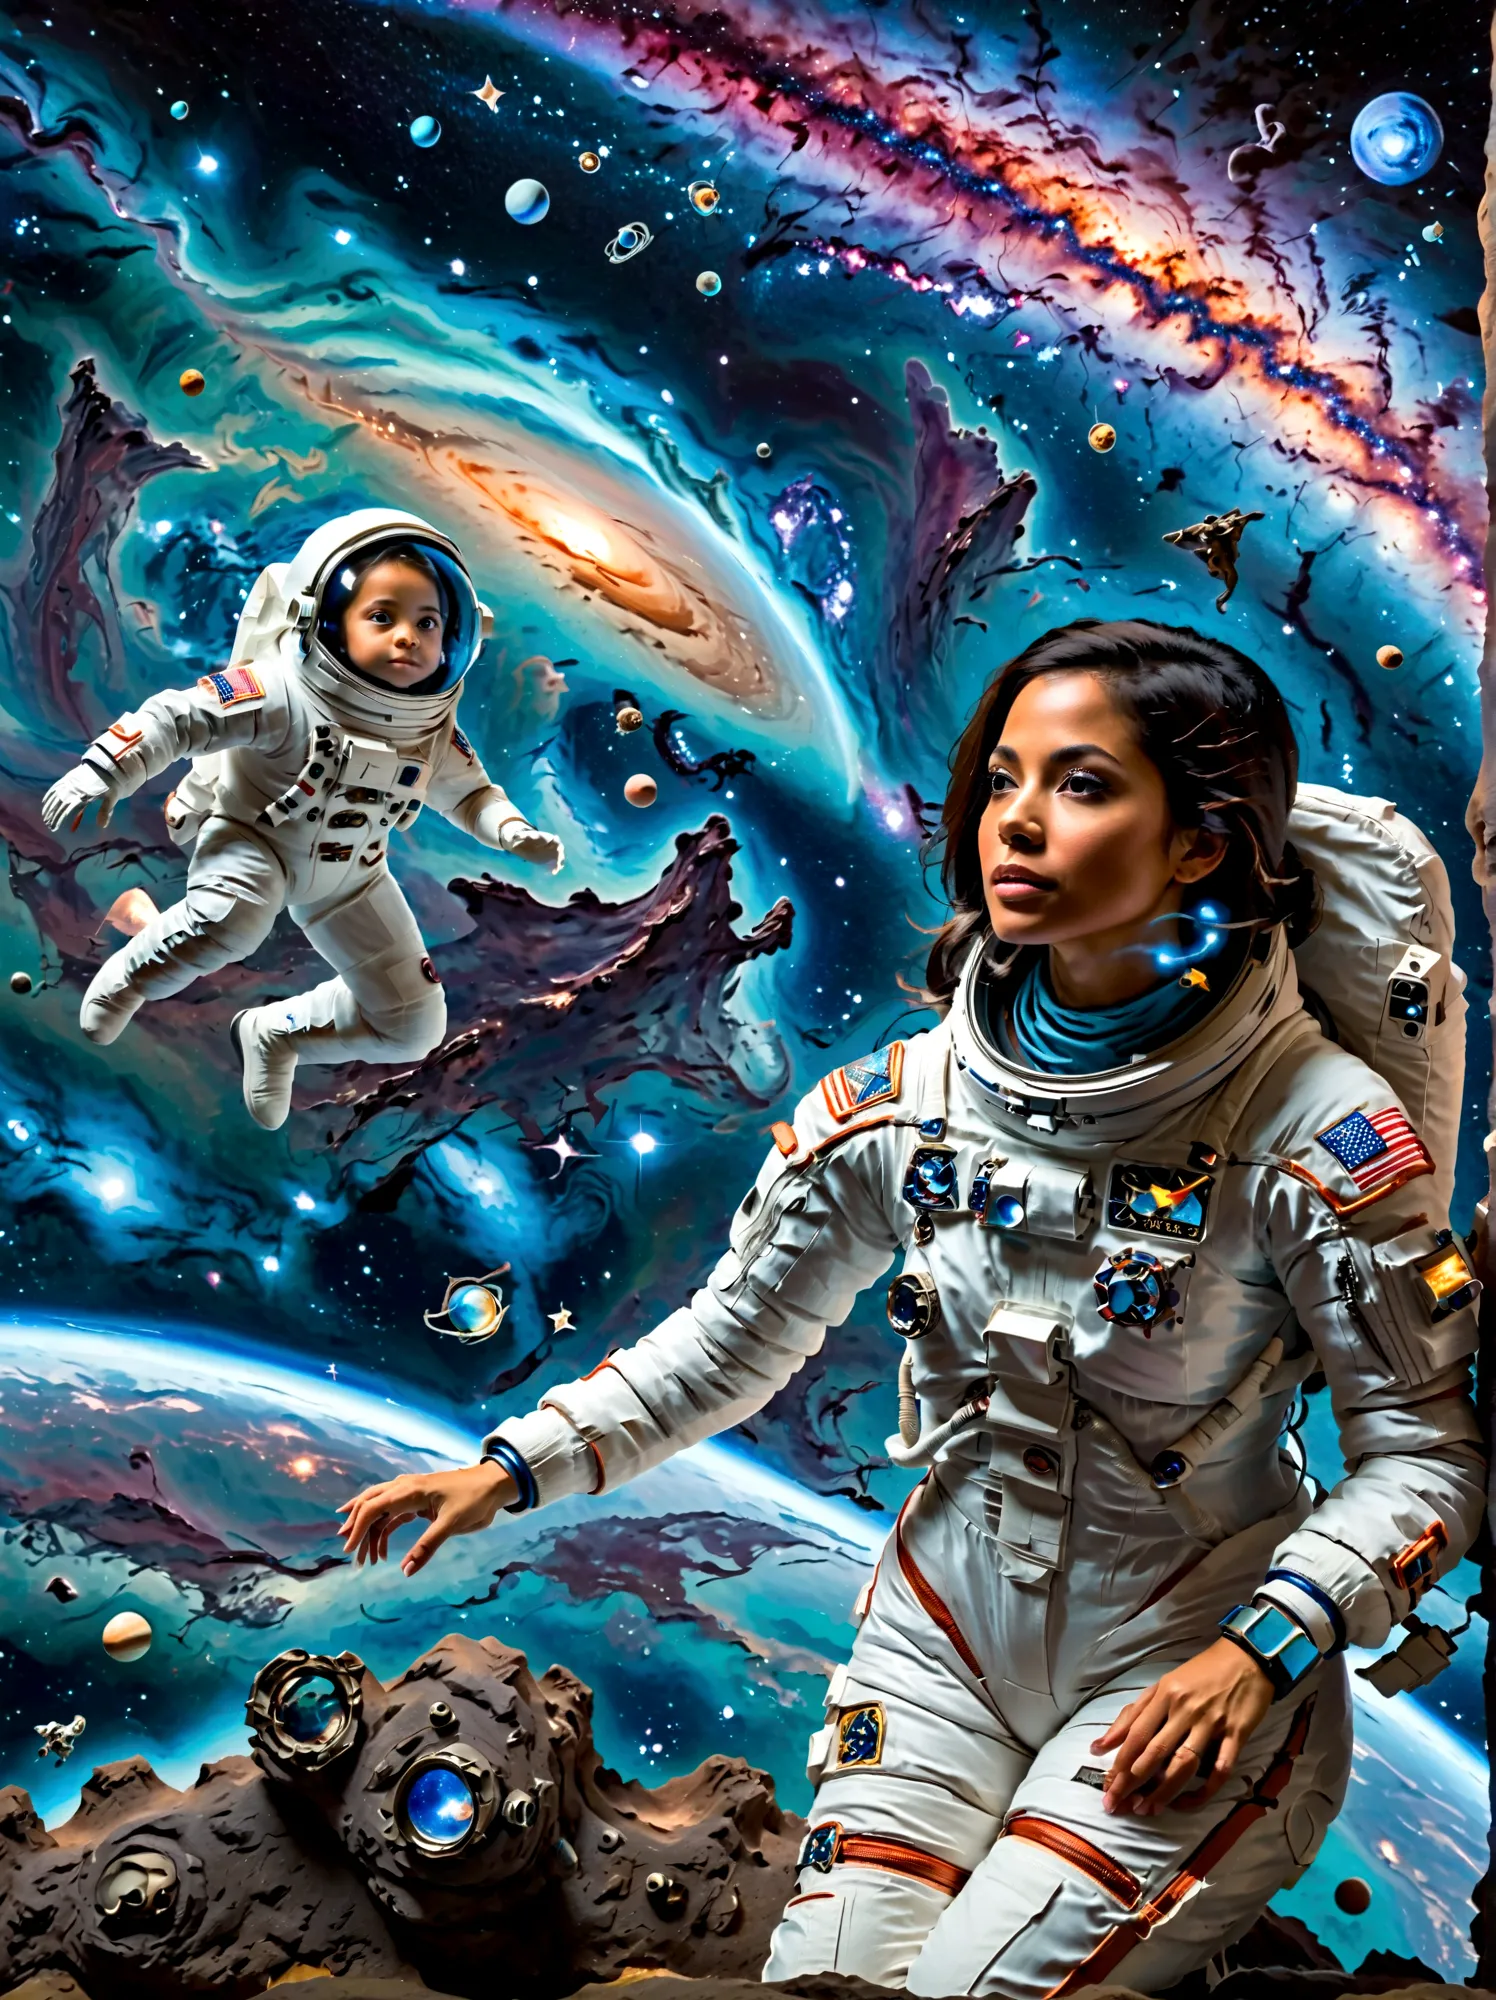 Visualize a scenario in the vast expanse of space. In the foreground, there's a Hispanic female astronaut, completely suited up ...